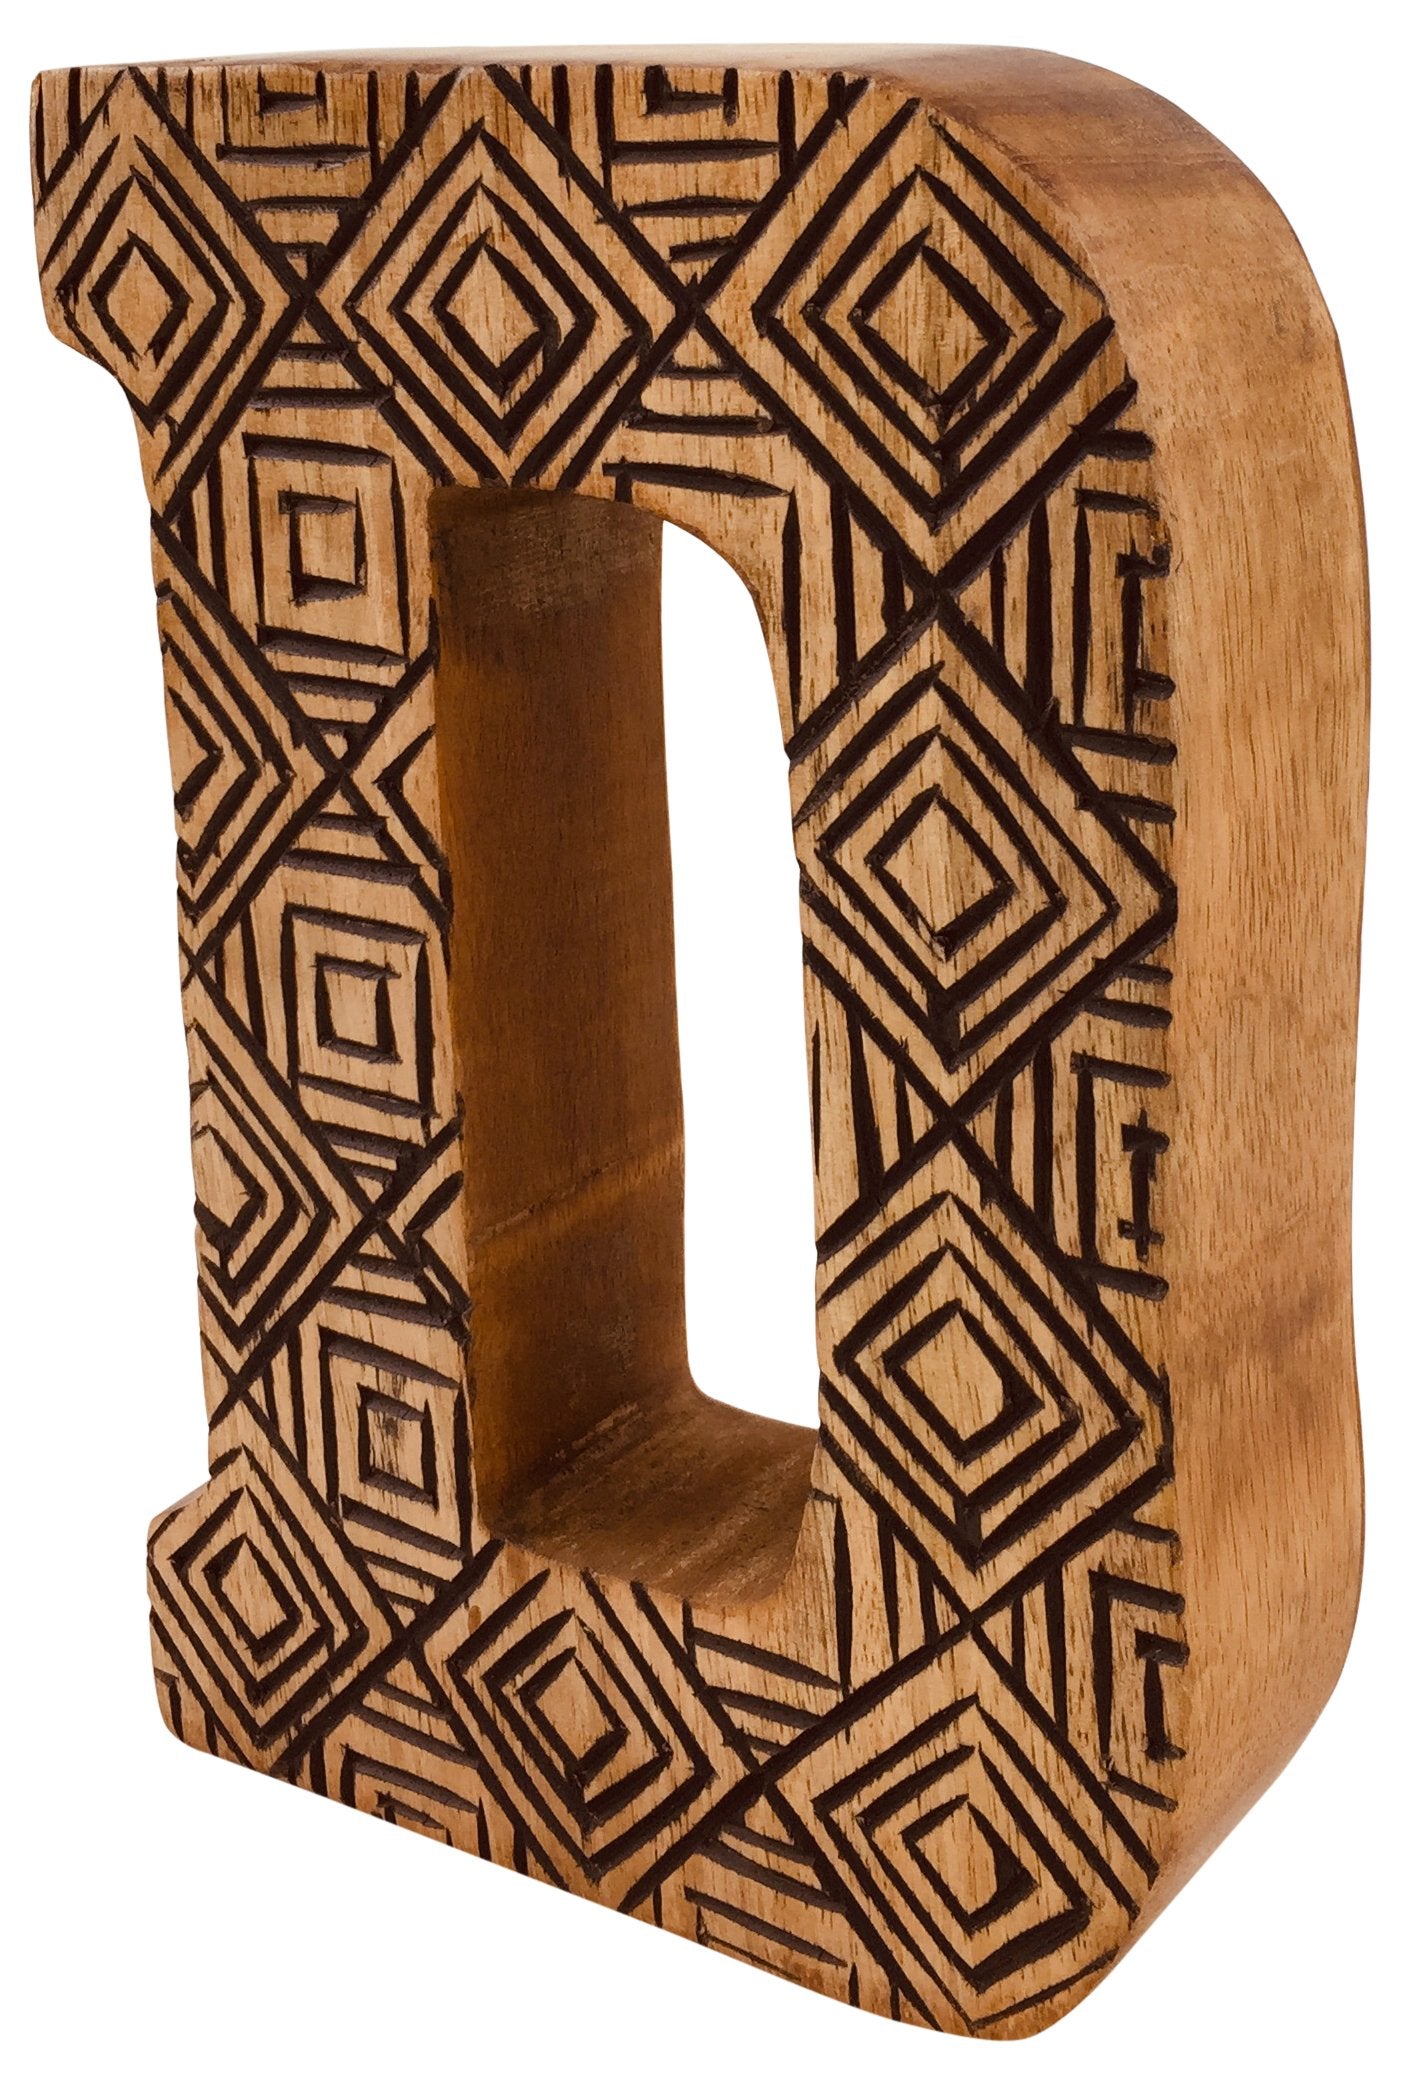 Hand Carved Wooden Geometric Letter D